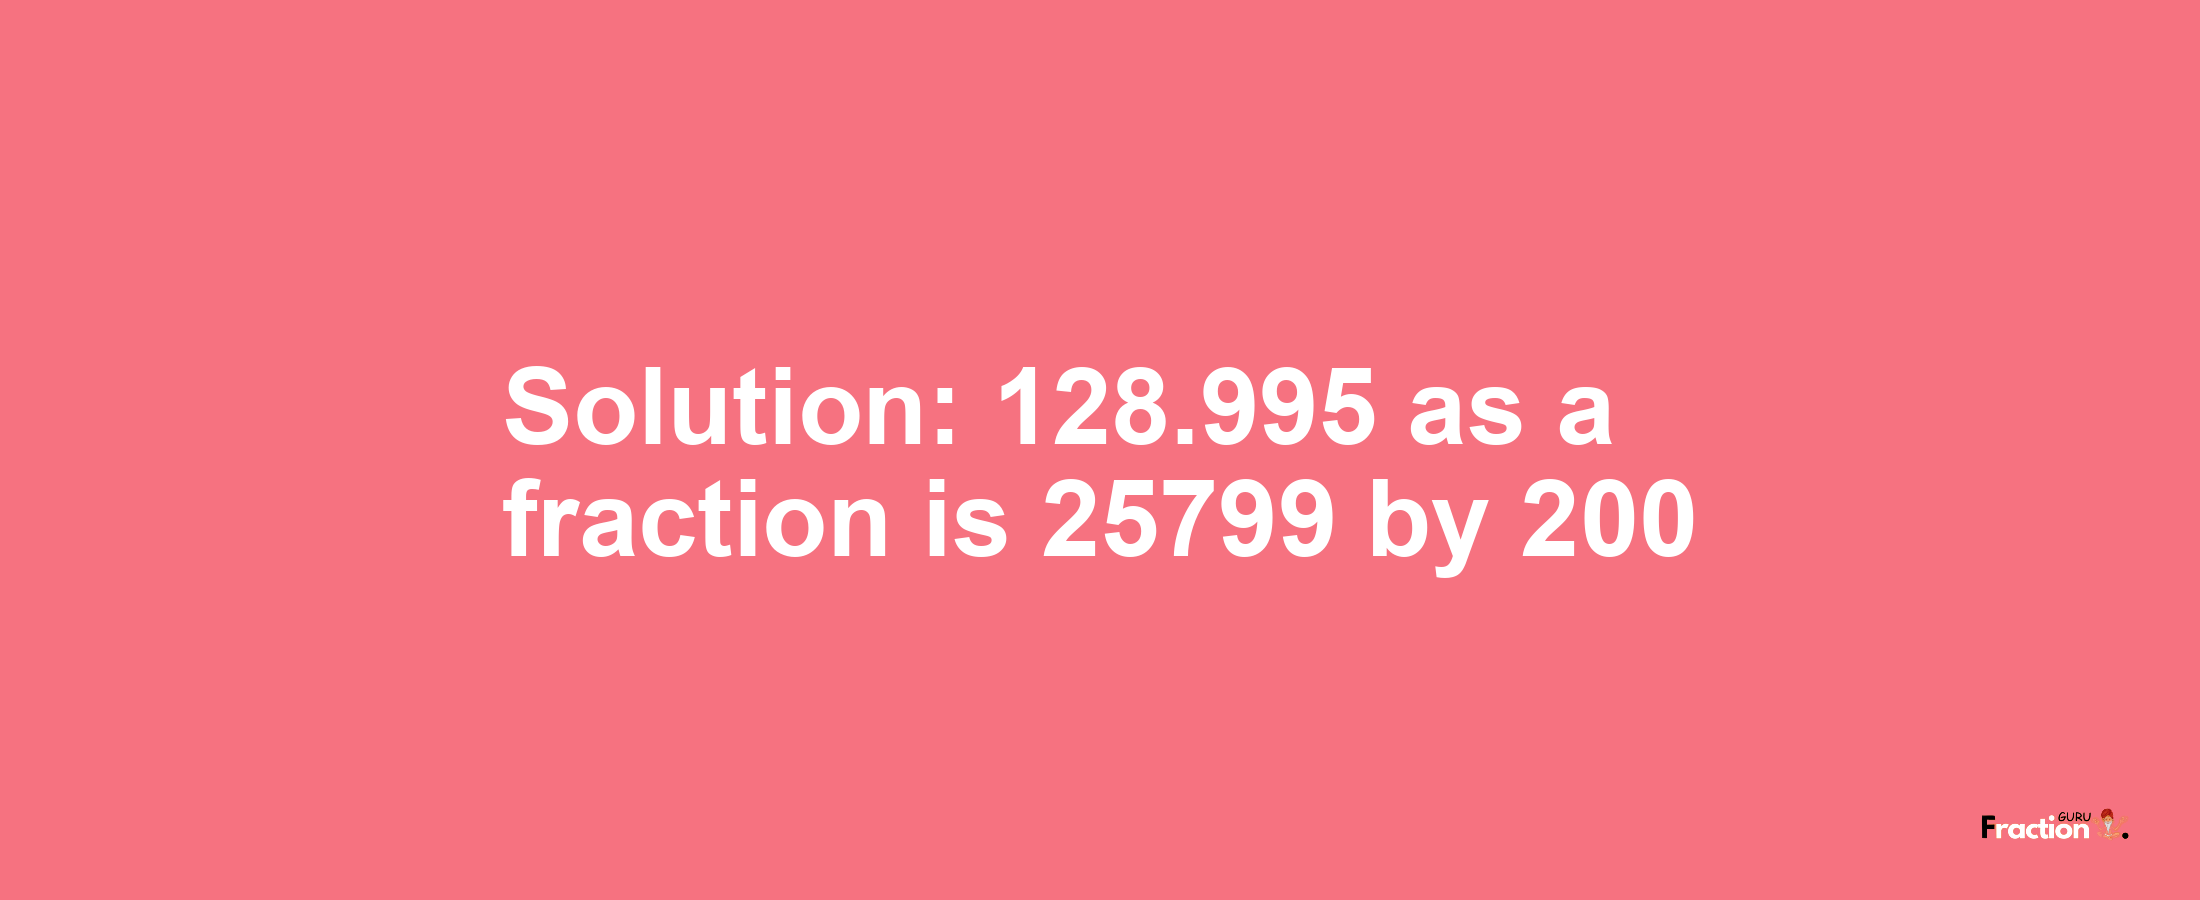 Solution:128.995 as a fraction is 25799/200